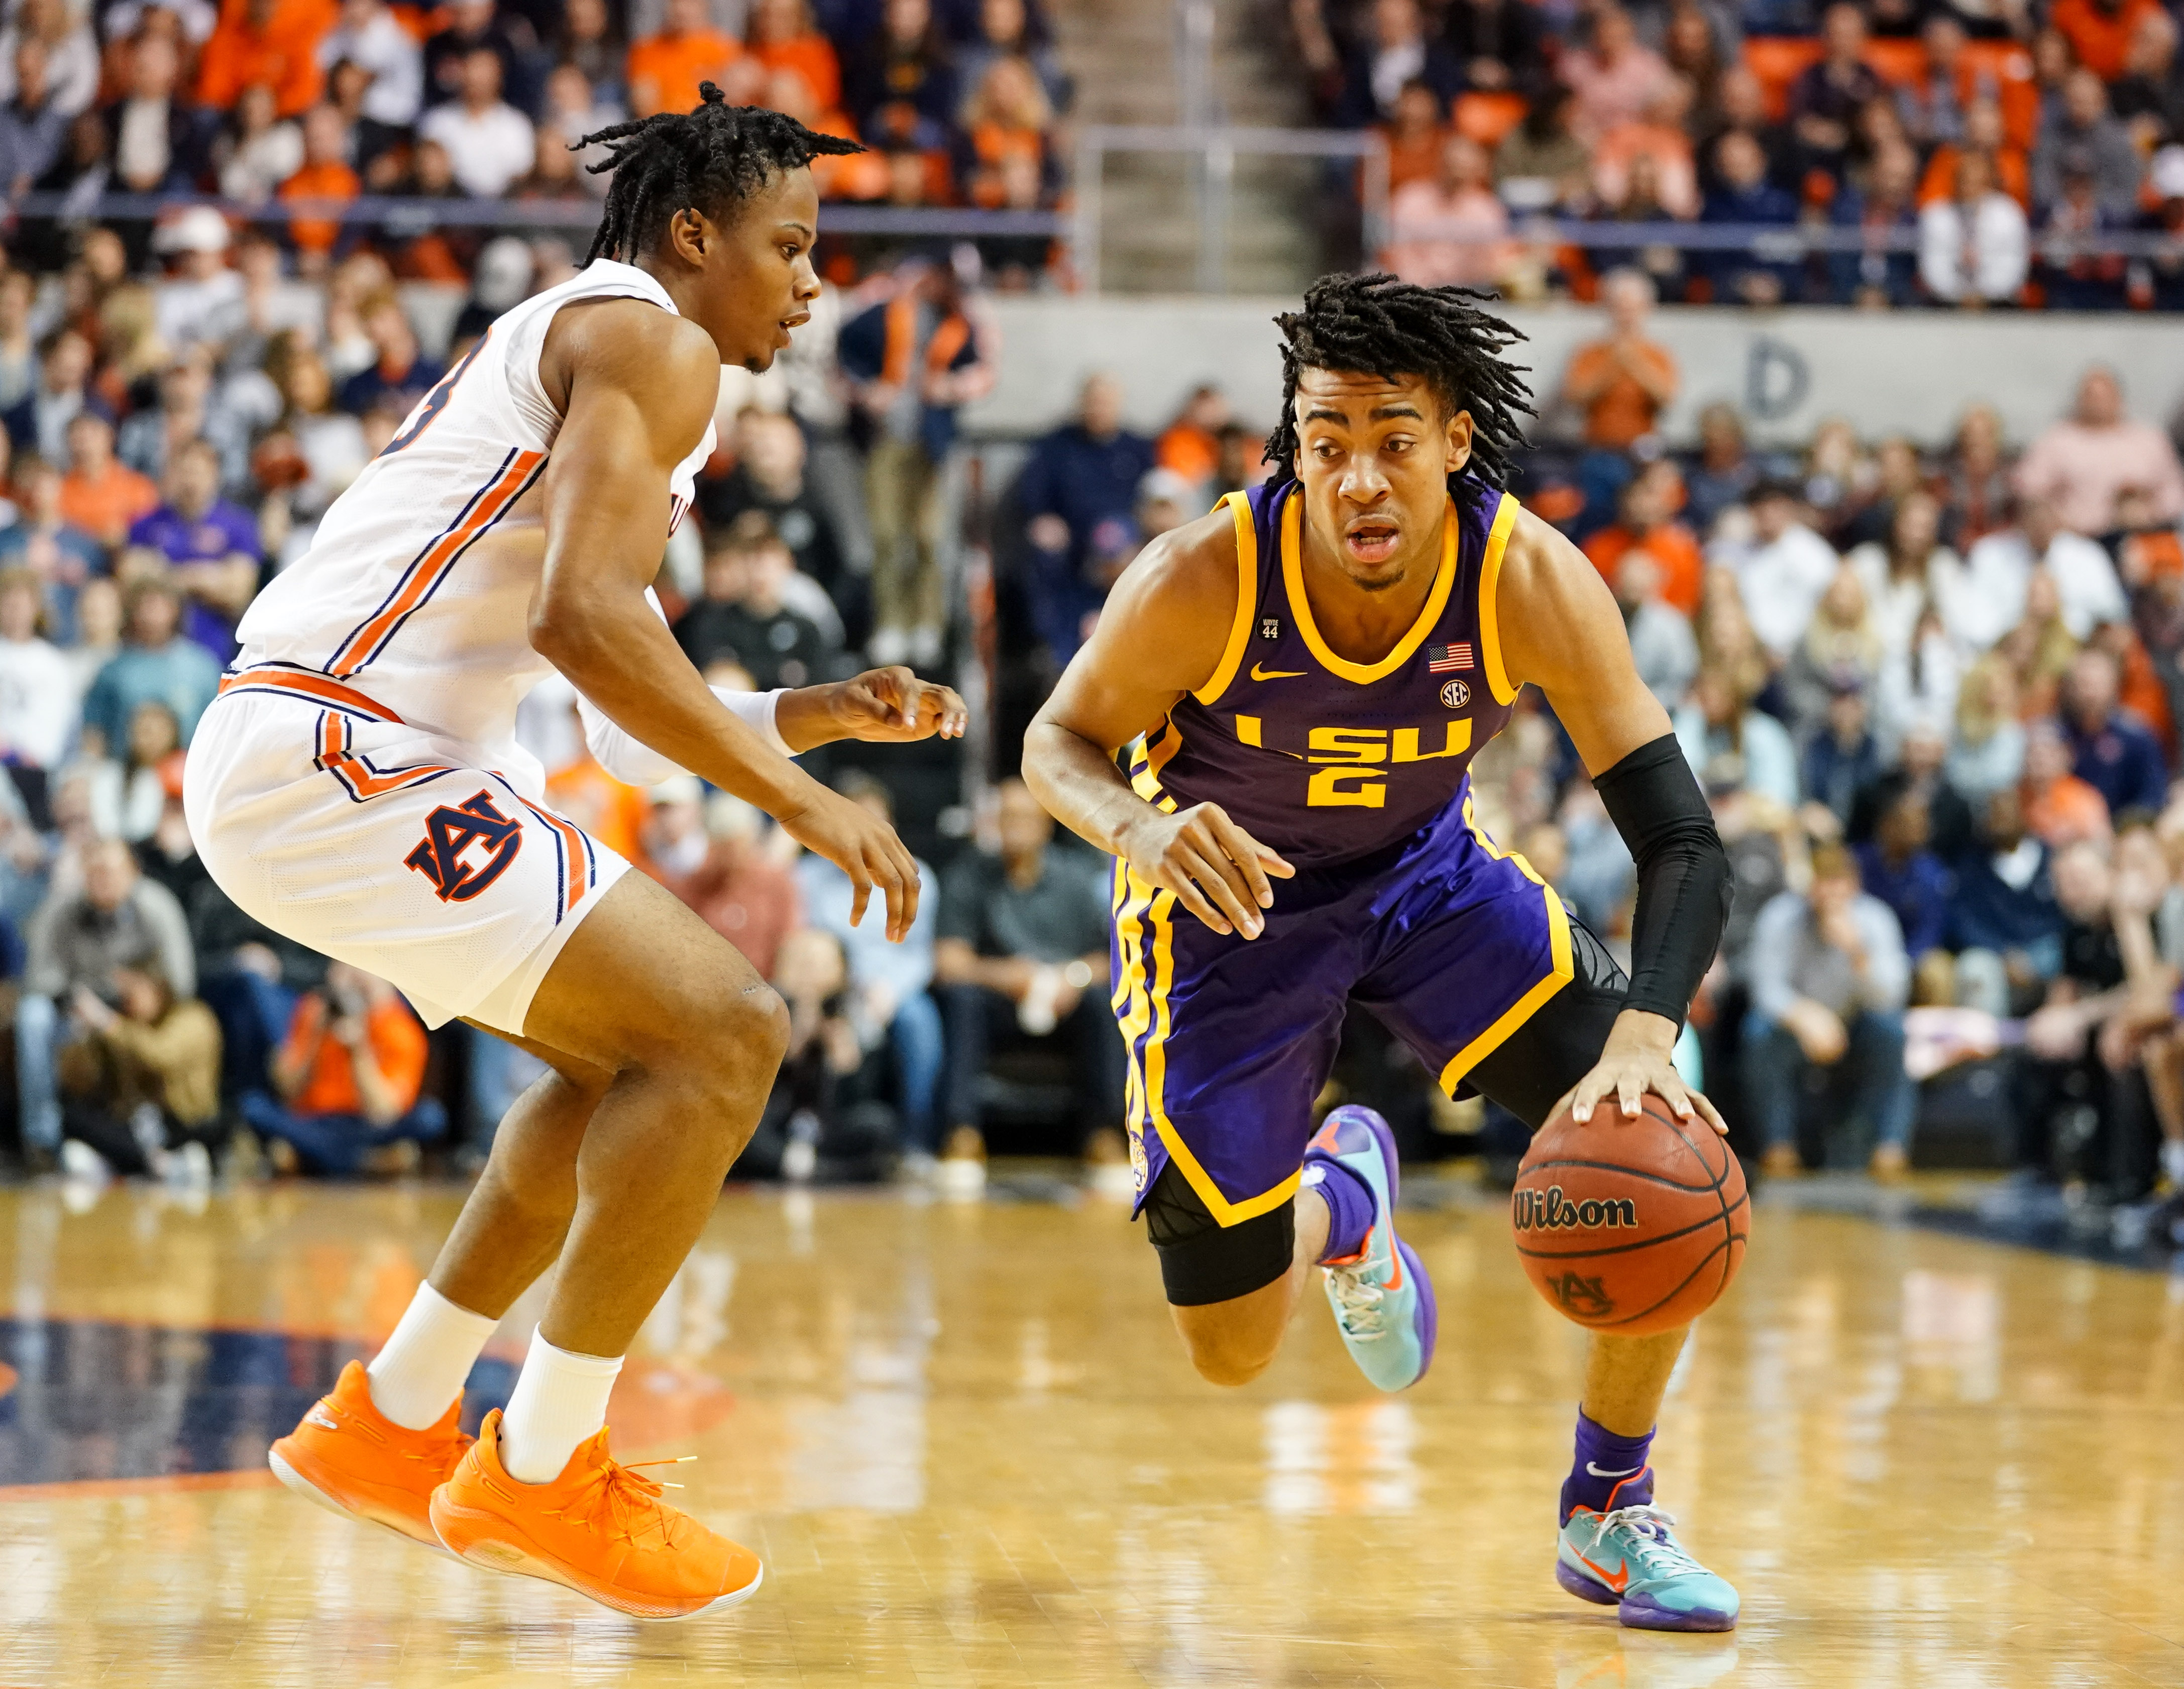 LSU Basketball Ranked No. 14 In the Athletic's "Early Top25" Preseason